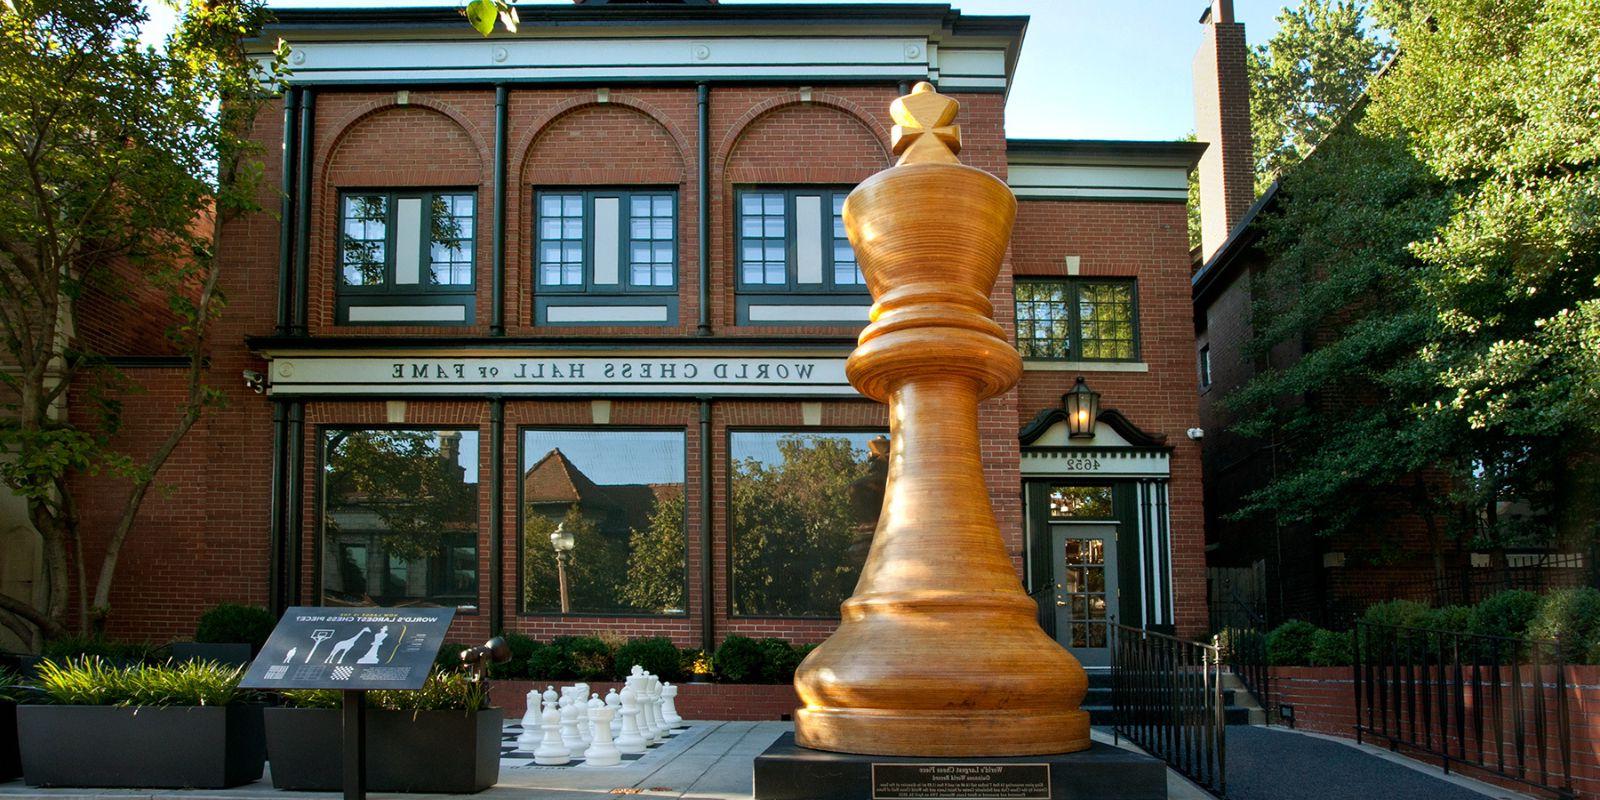 In the Central West End, the world’s largest chess piece stands in front of the World Chess Hall of Fame.